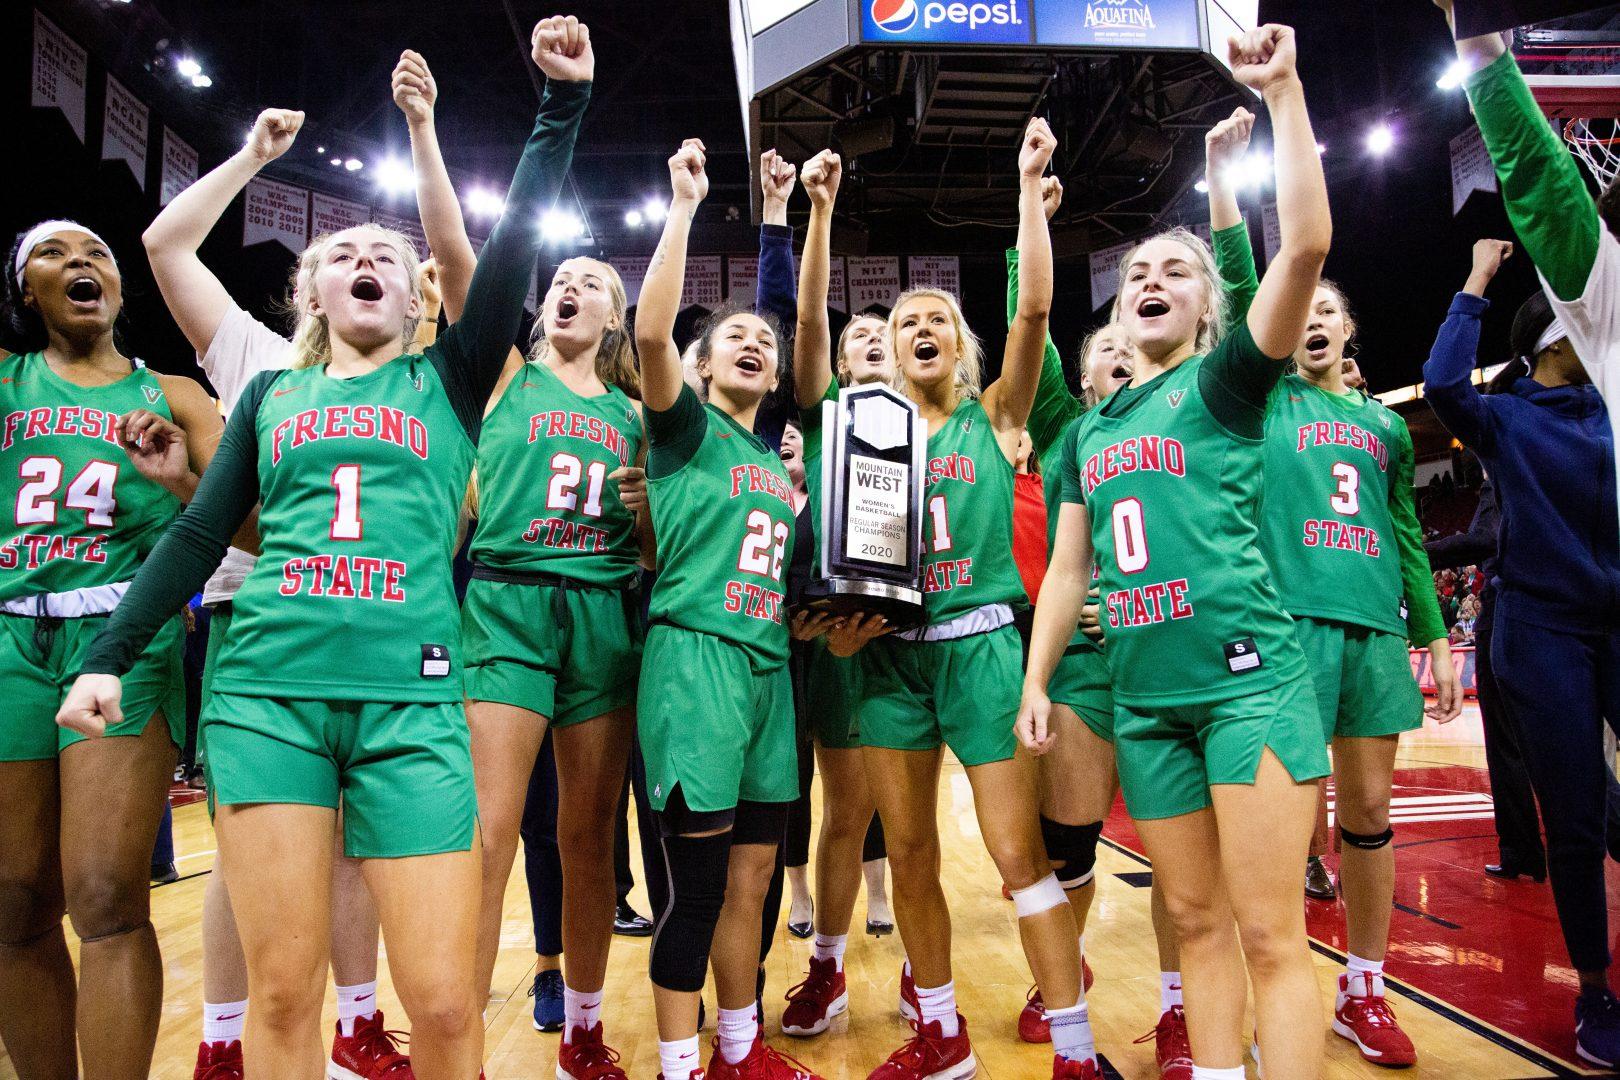 Fresno+State+women%E2%80%99s+basketball+team+celebrate+their+Mountain+West+title%2C+clinching+win+in+front+of+the+student+section+at+the+Save+Mart+Center+on+Wednesday+Feb.+12%2C+2020.+%28Armando+Carreno%2FThe+Collegian%29